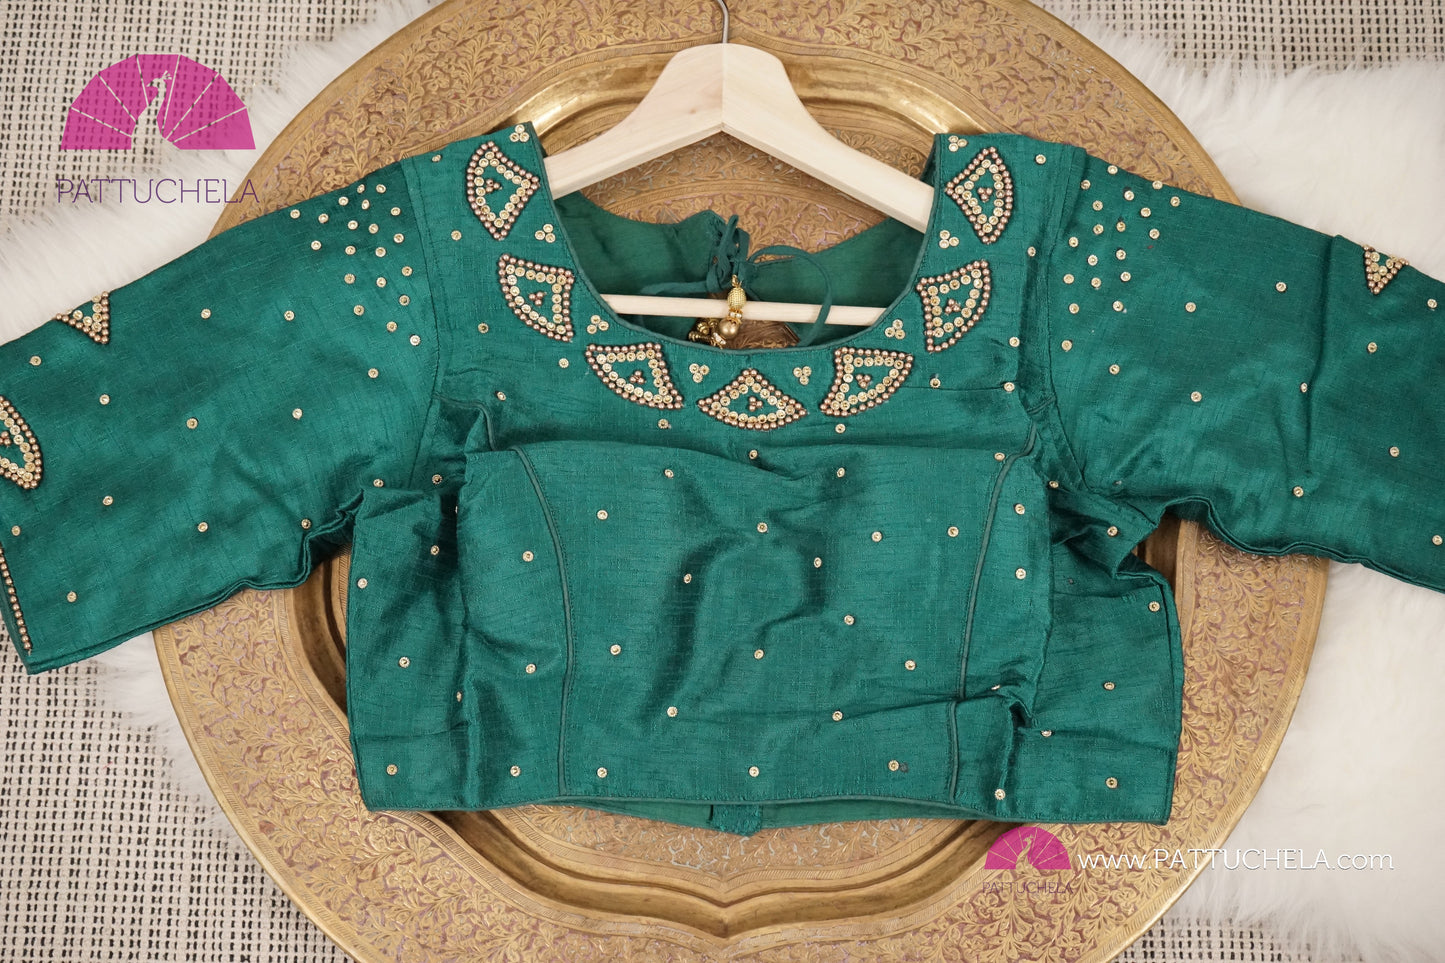 Beautiful Designer Green Pure Aari Hand Work Stitched Blouse for Party Wear, Wedding, Festivals, Occasion Wear | Ready made Blouse